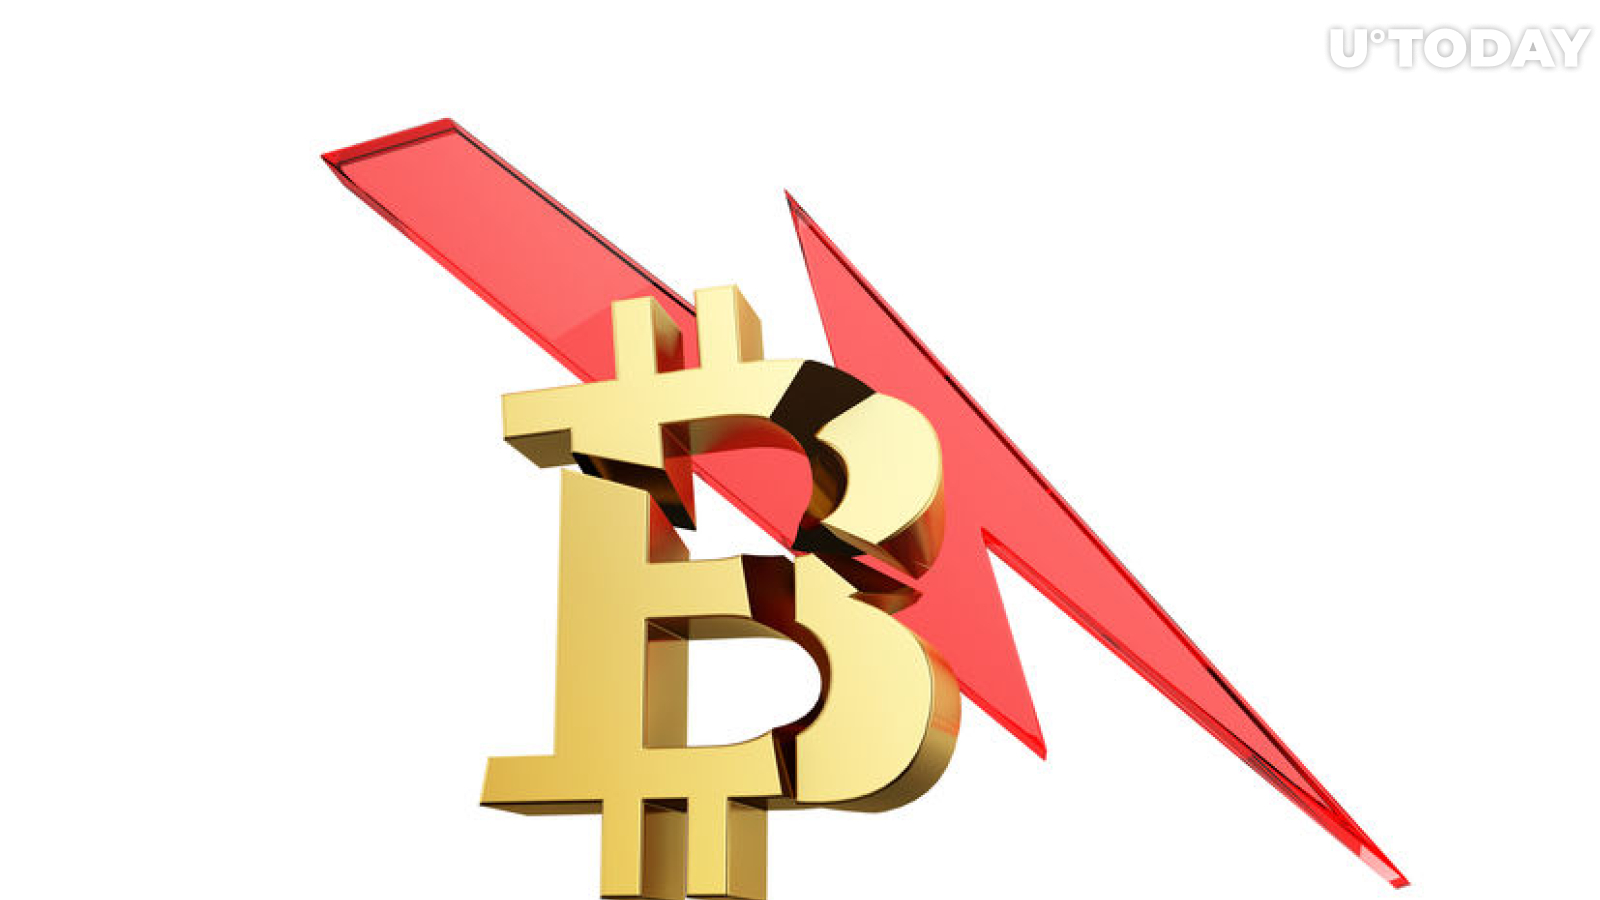 Bitcoin Price Could Drop to $2,000 or Even to $200, According to Peter Schiff